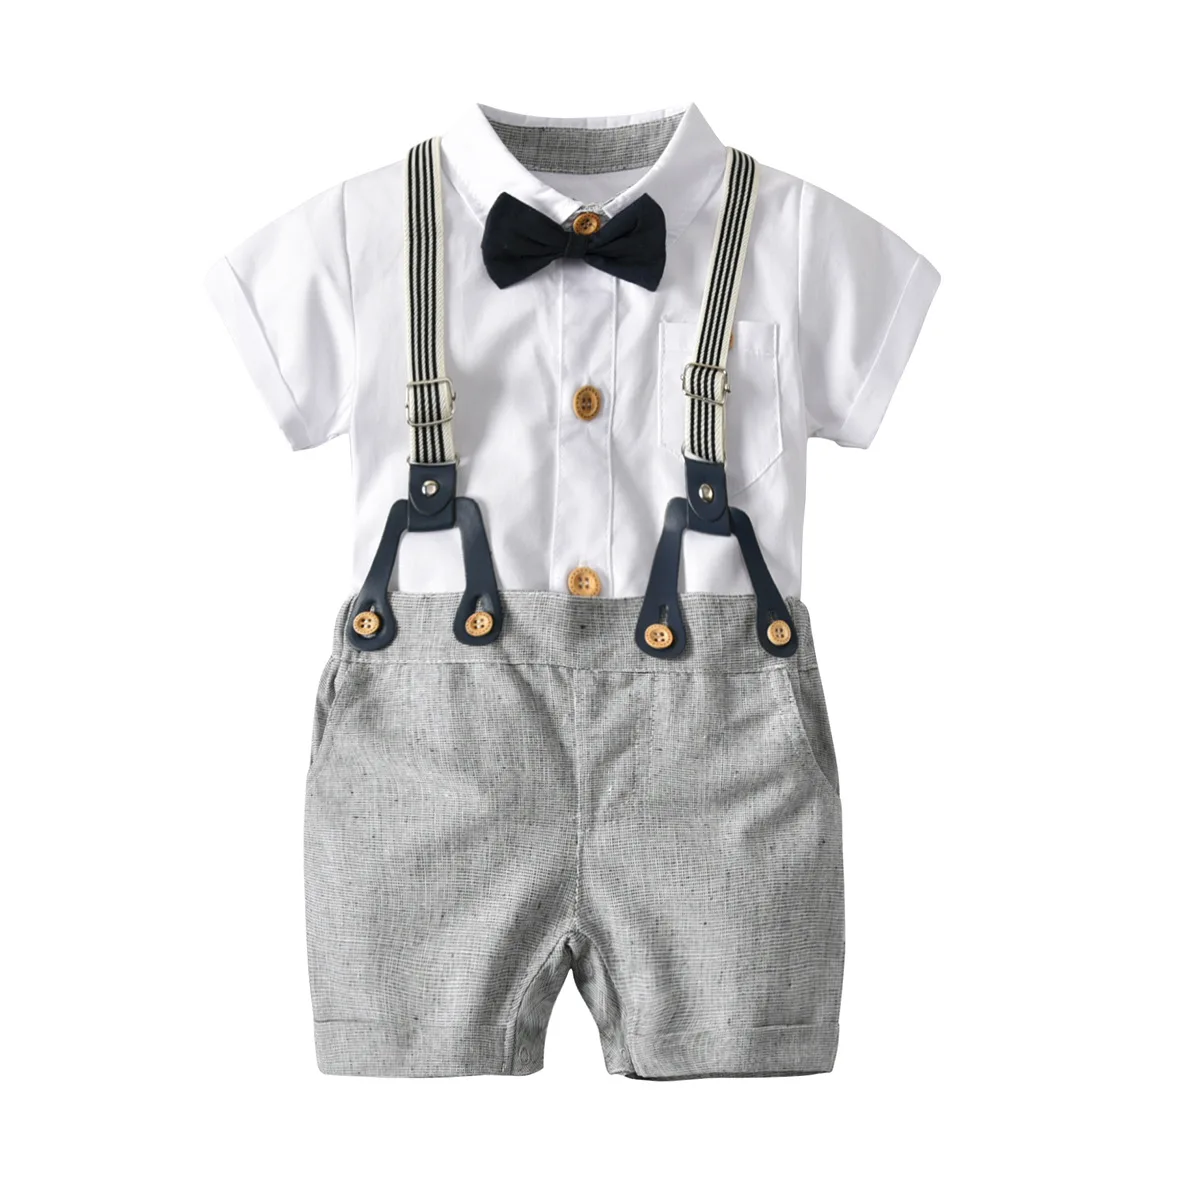 Baby Boys Formal Suit Gentleman Bowtie Romper Suspenders Shorts Wedding Tuxedo Outfit Cake Smash Christening Clothes 